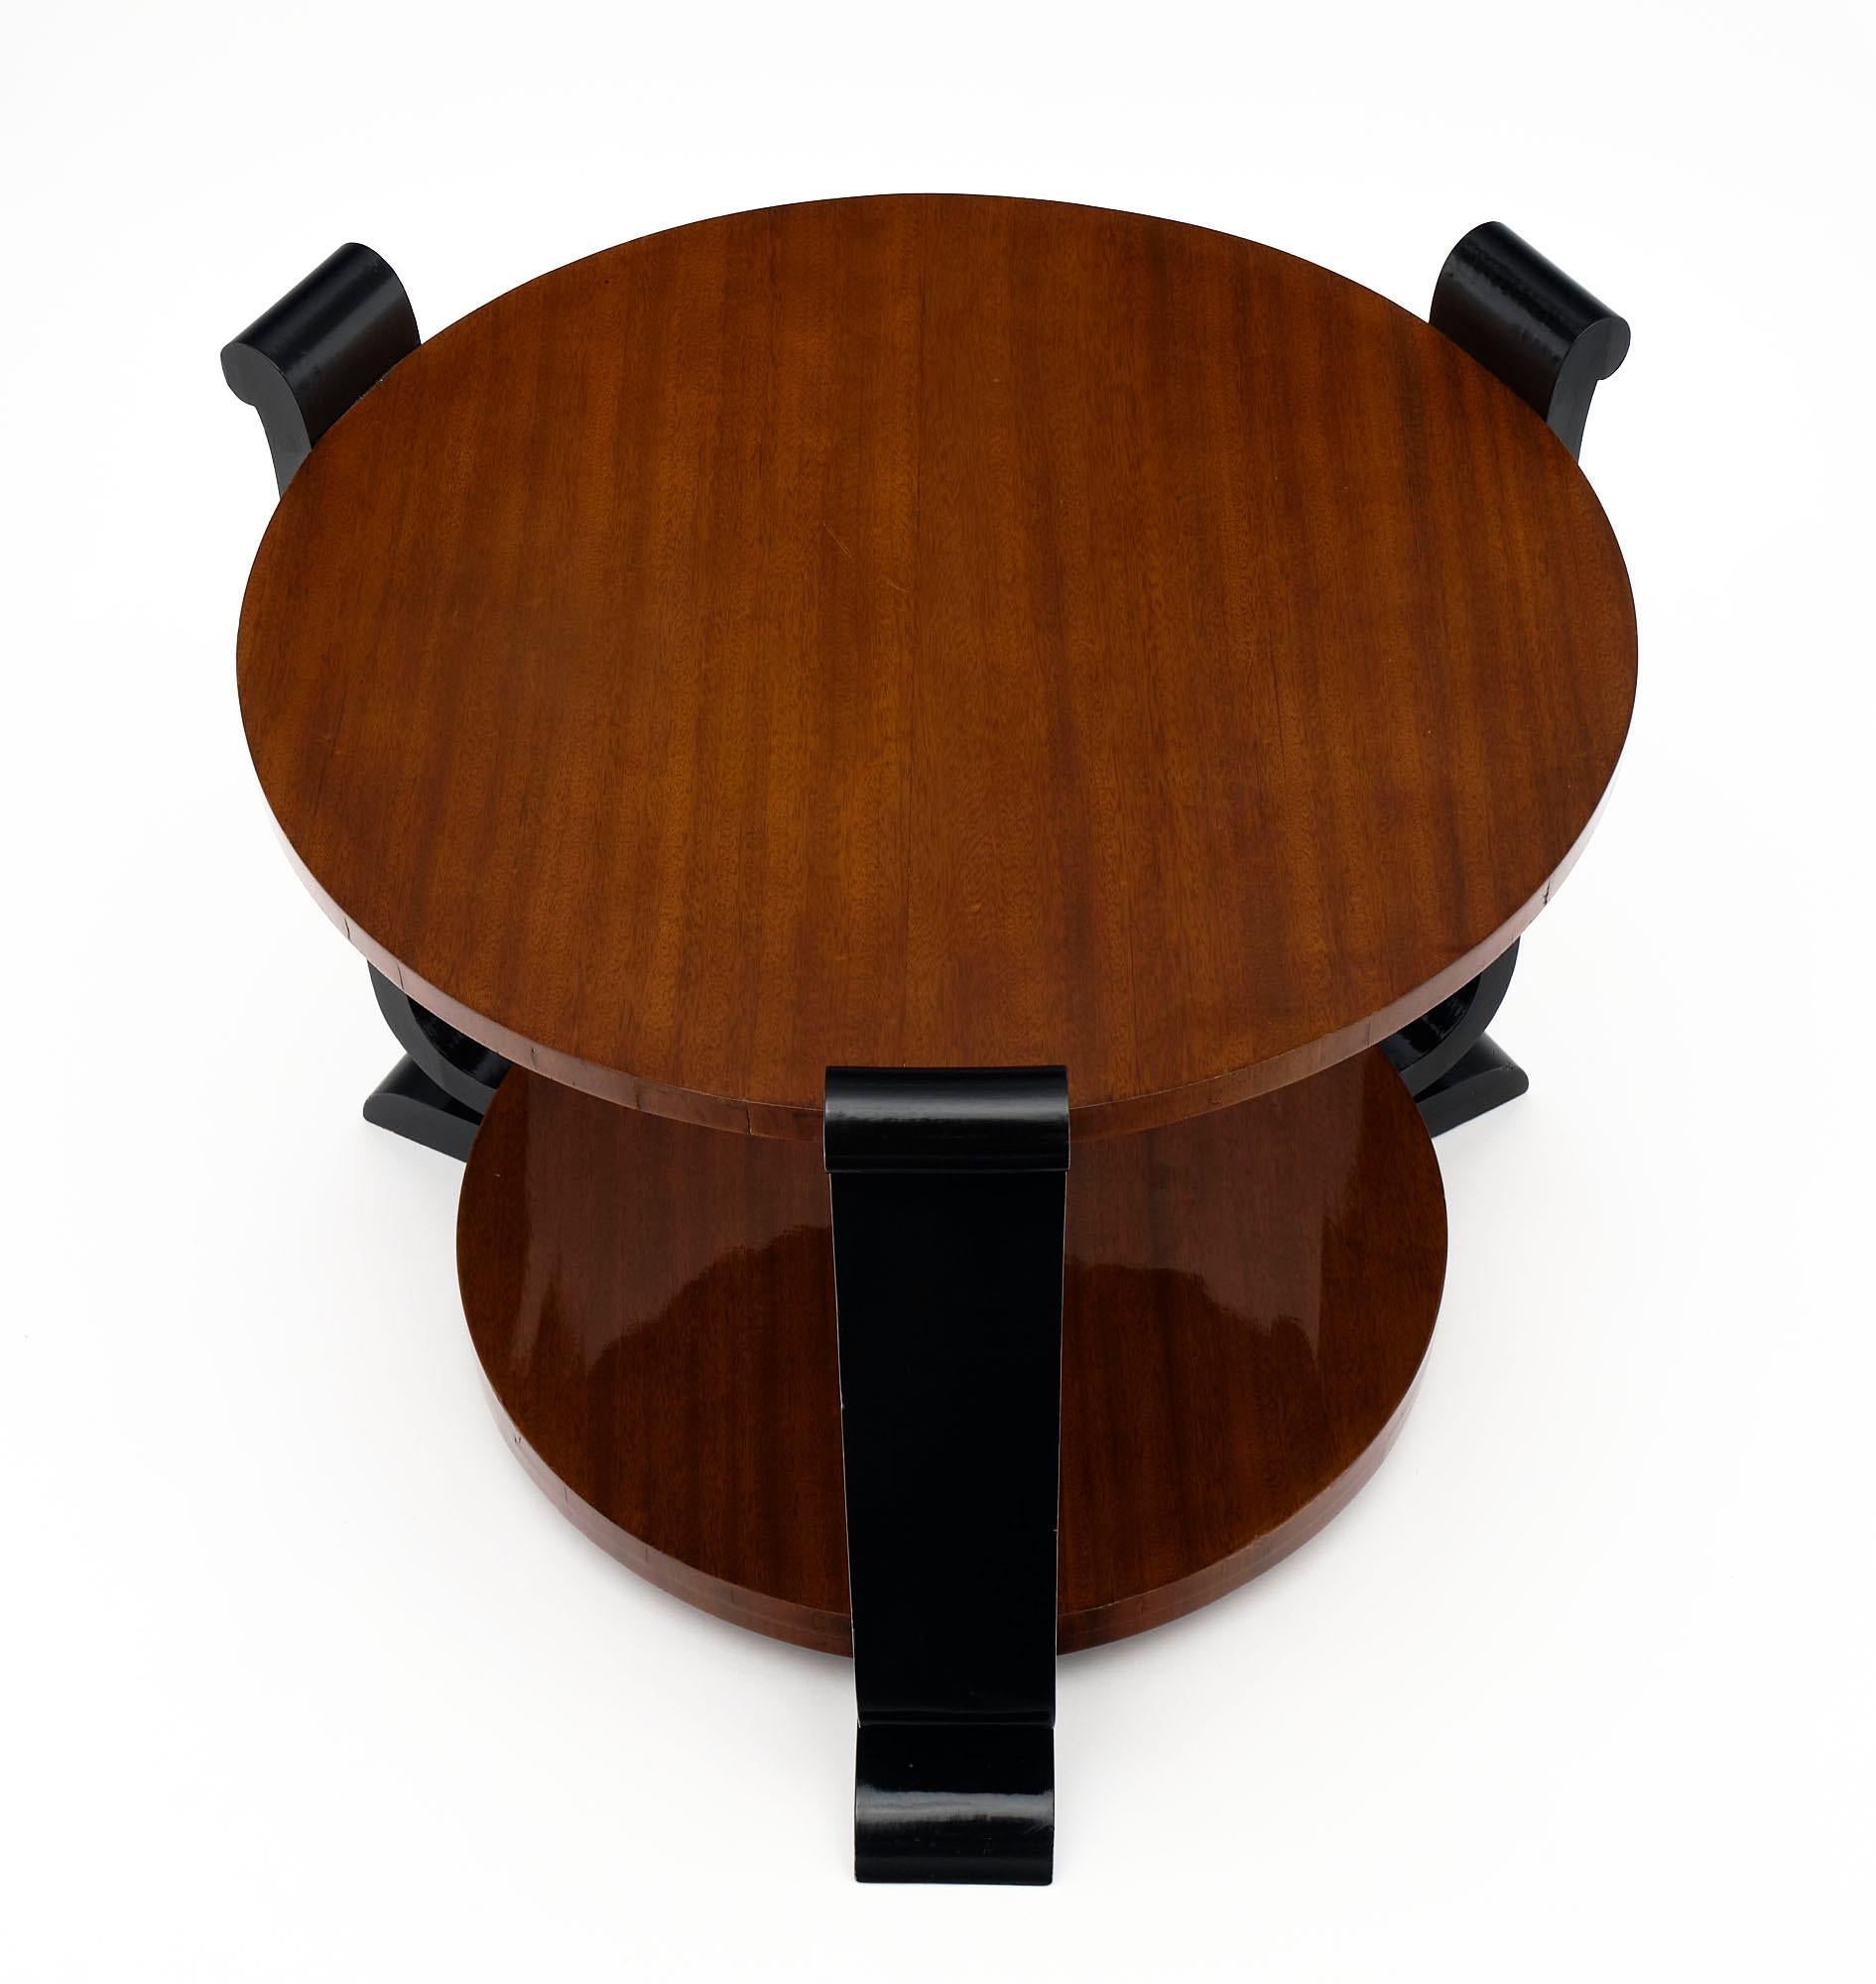 Gueridon, side table, from the Art Deco period of France. This table is made of mahogany and ebonized mahogany with a lustrous French polish finish.